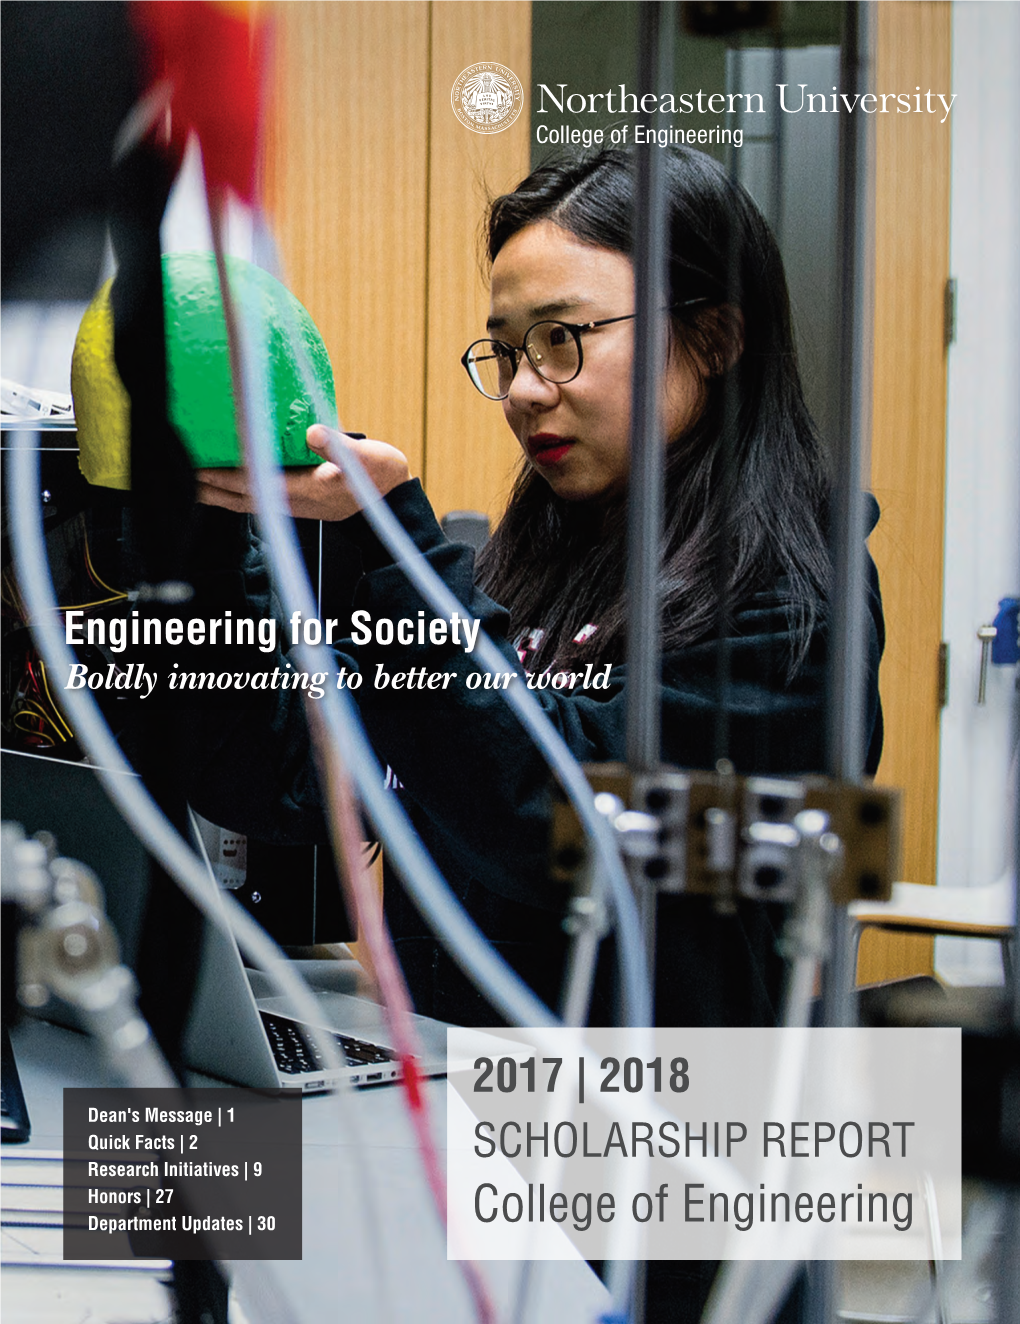 2017-2018 for Northeastern University’S College of Engineering